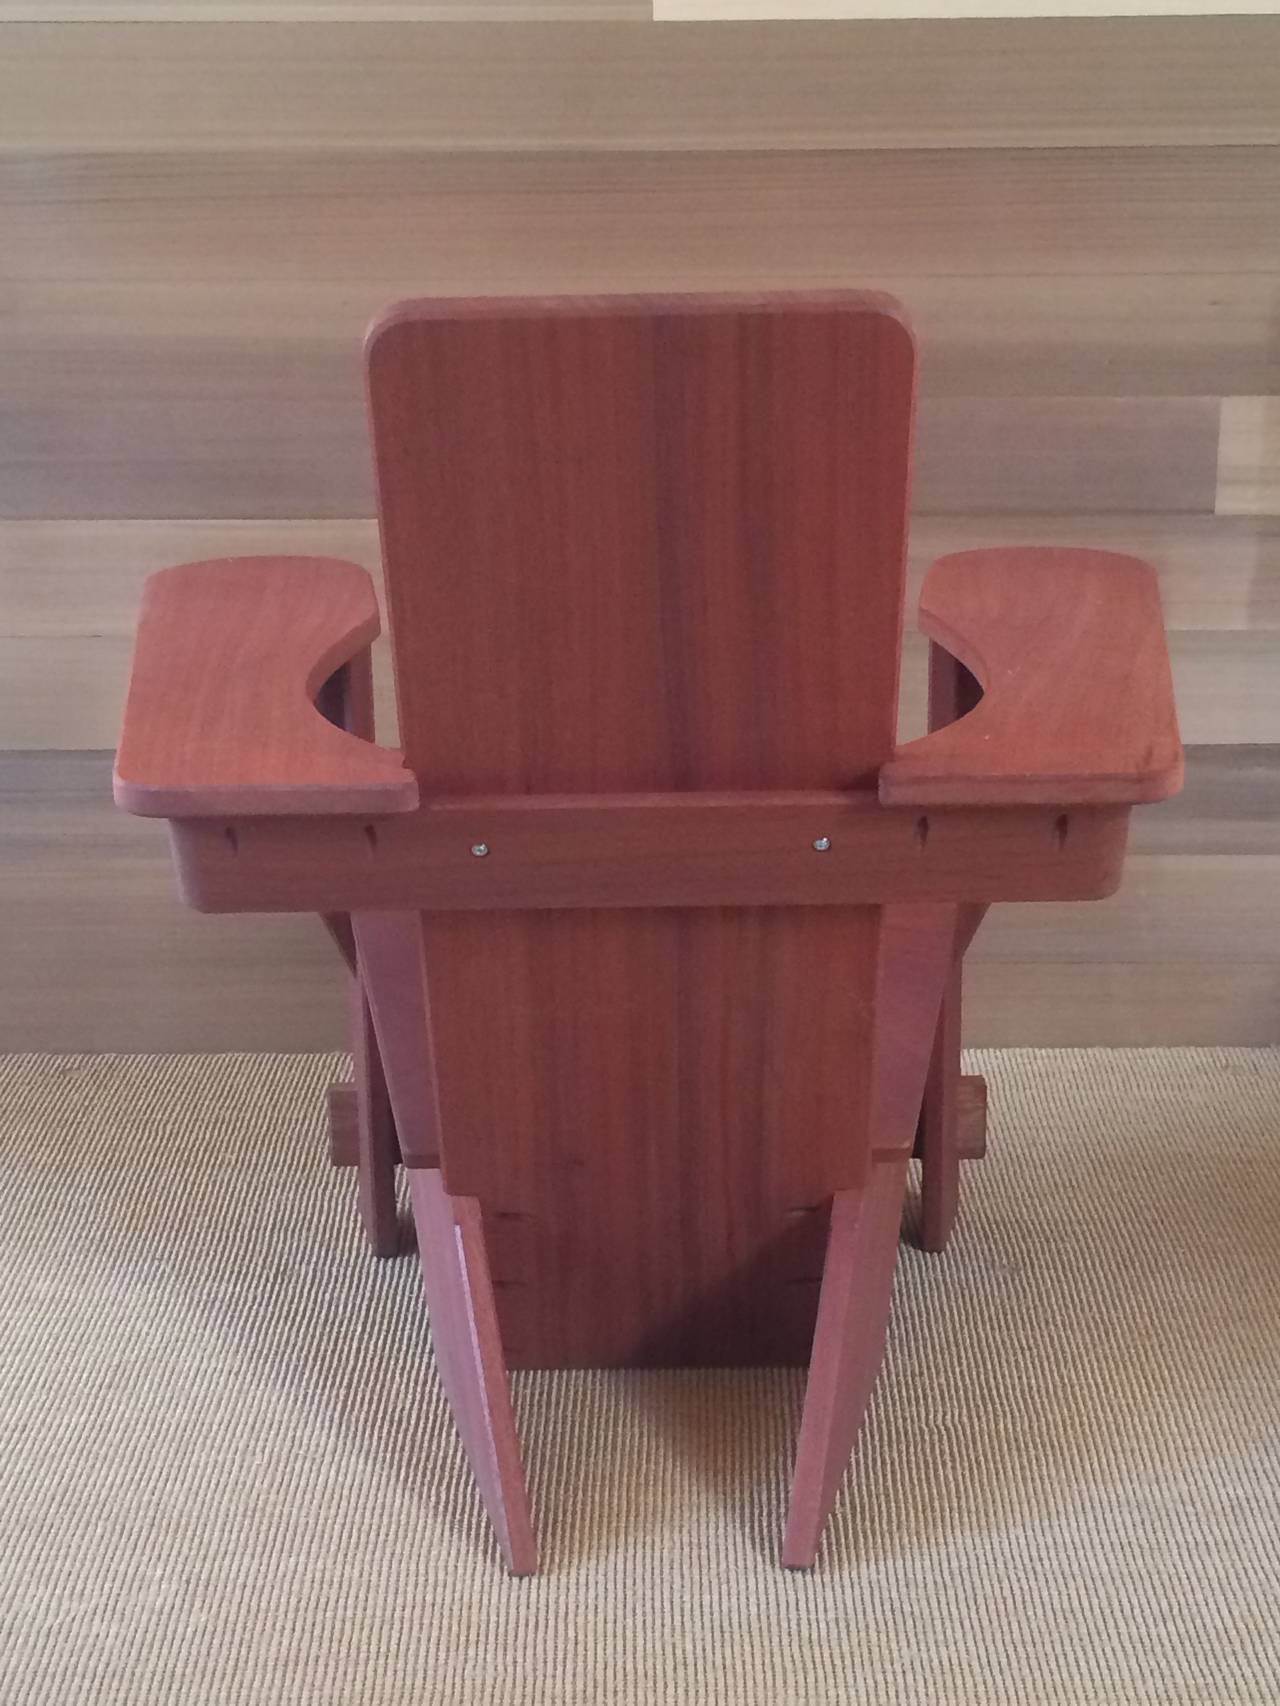 Westport Chairs in Mahogany In Excellent Condition For Sale In Southampton, NY